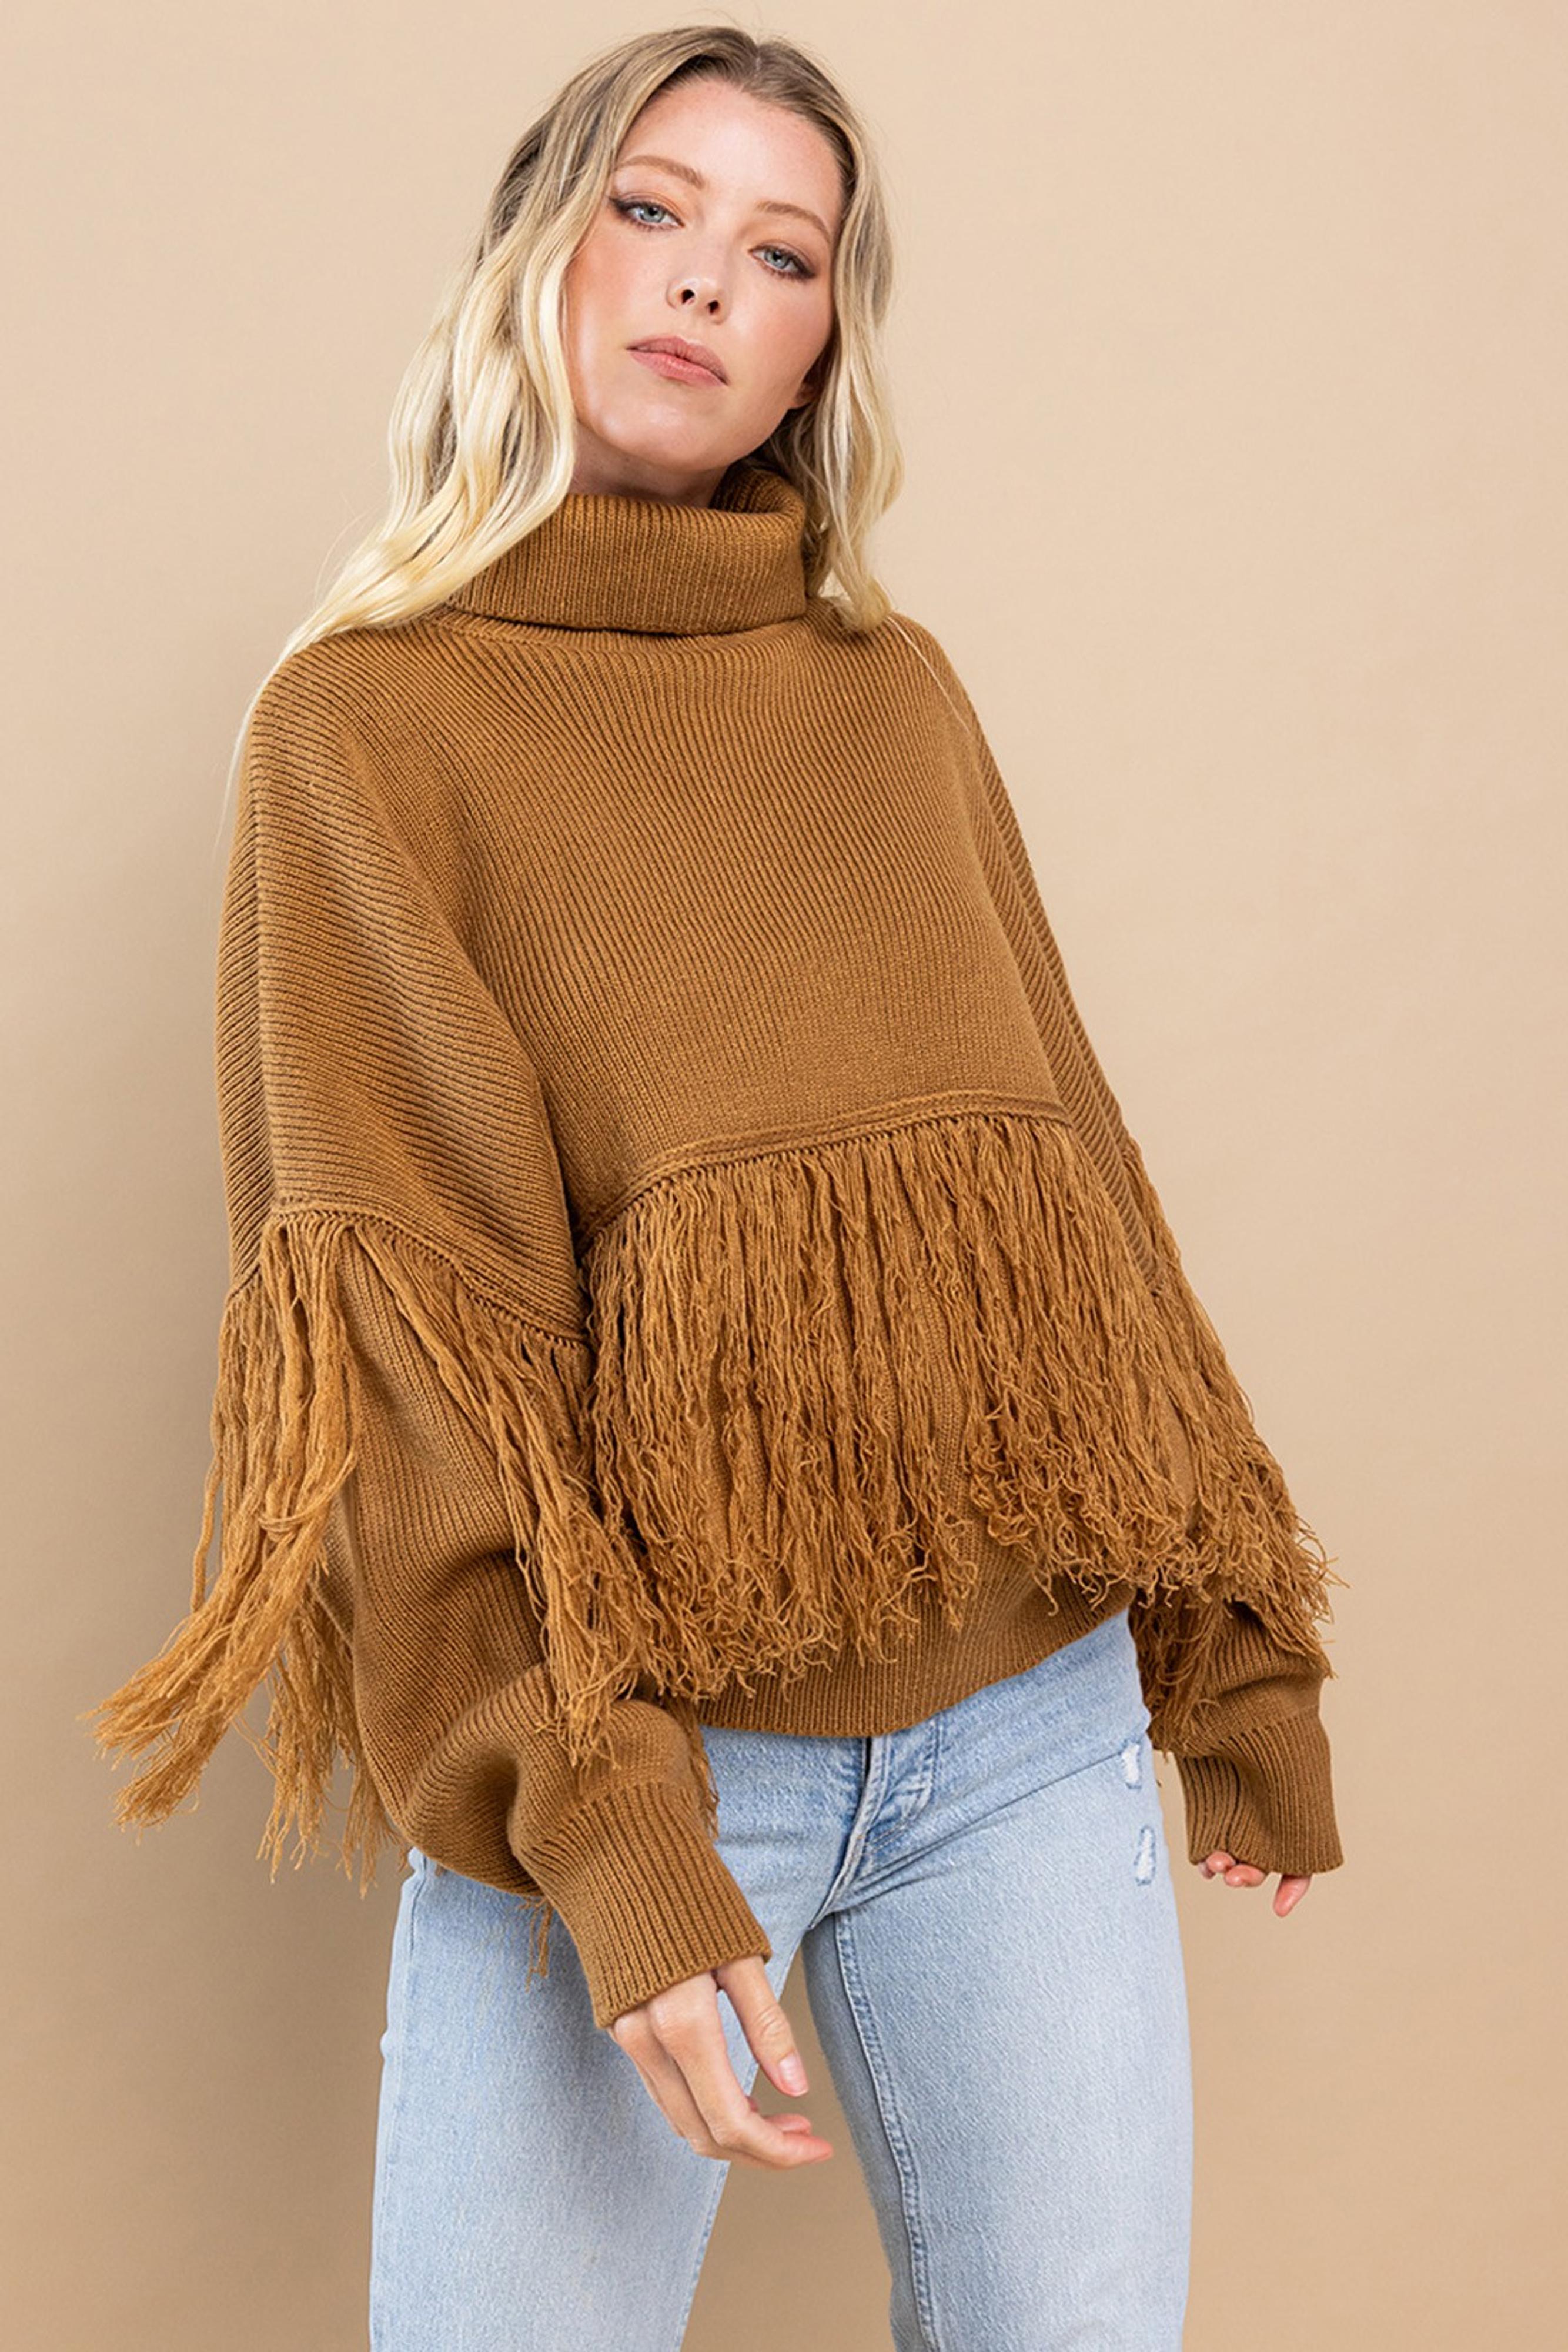  Come On Girls Fringe Sweater